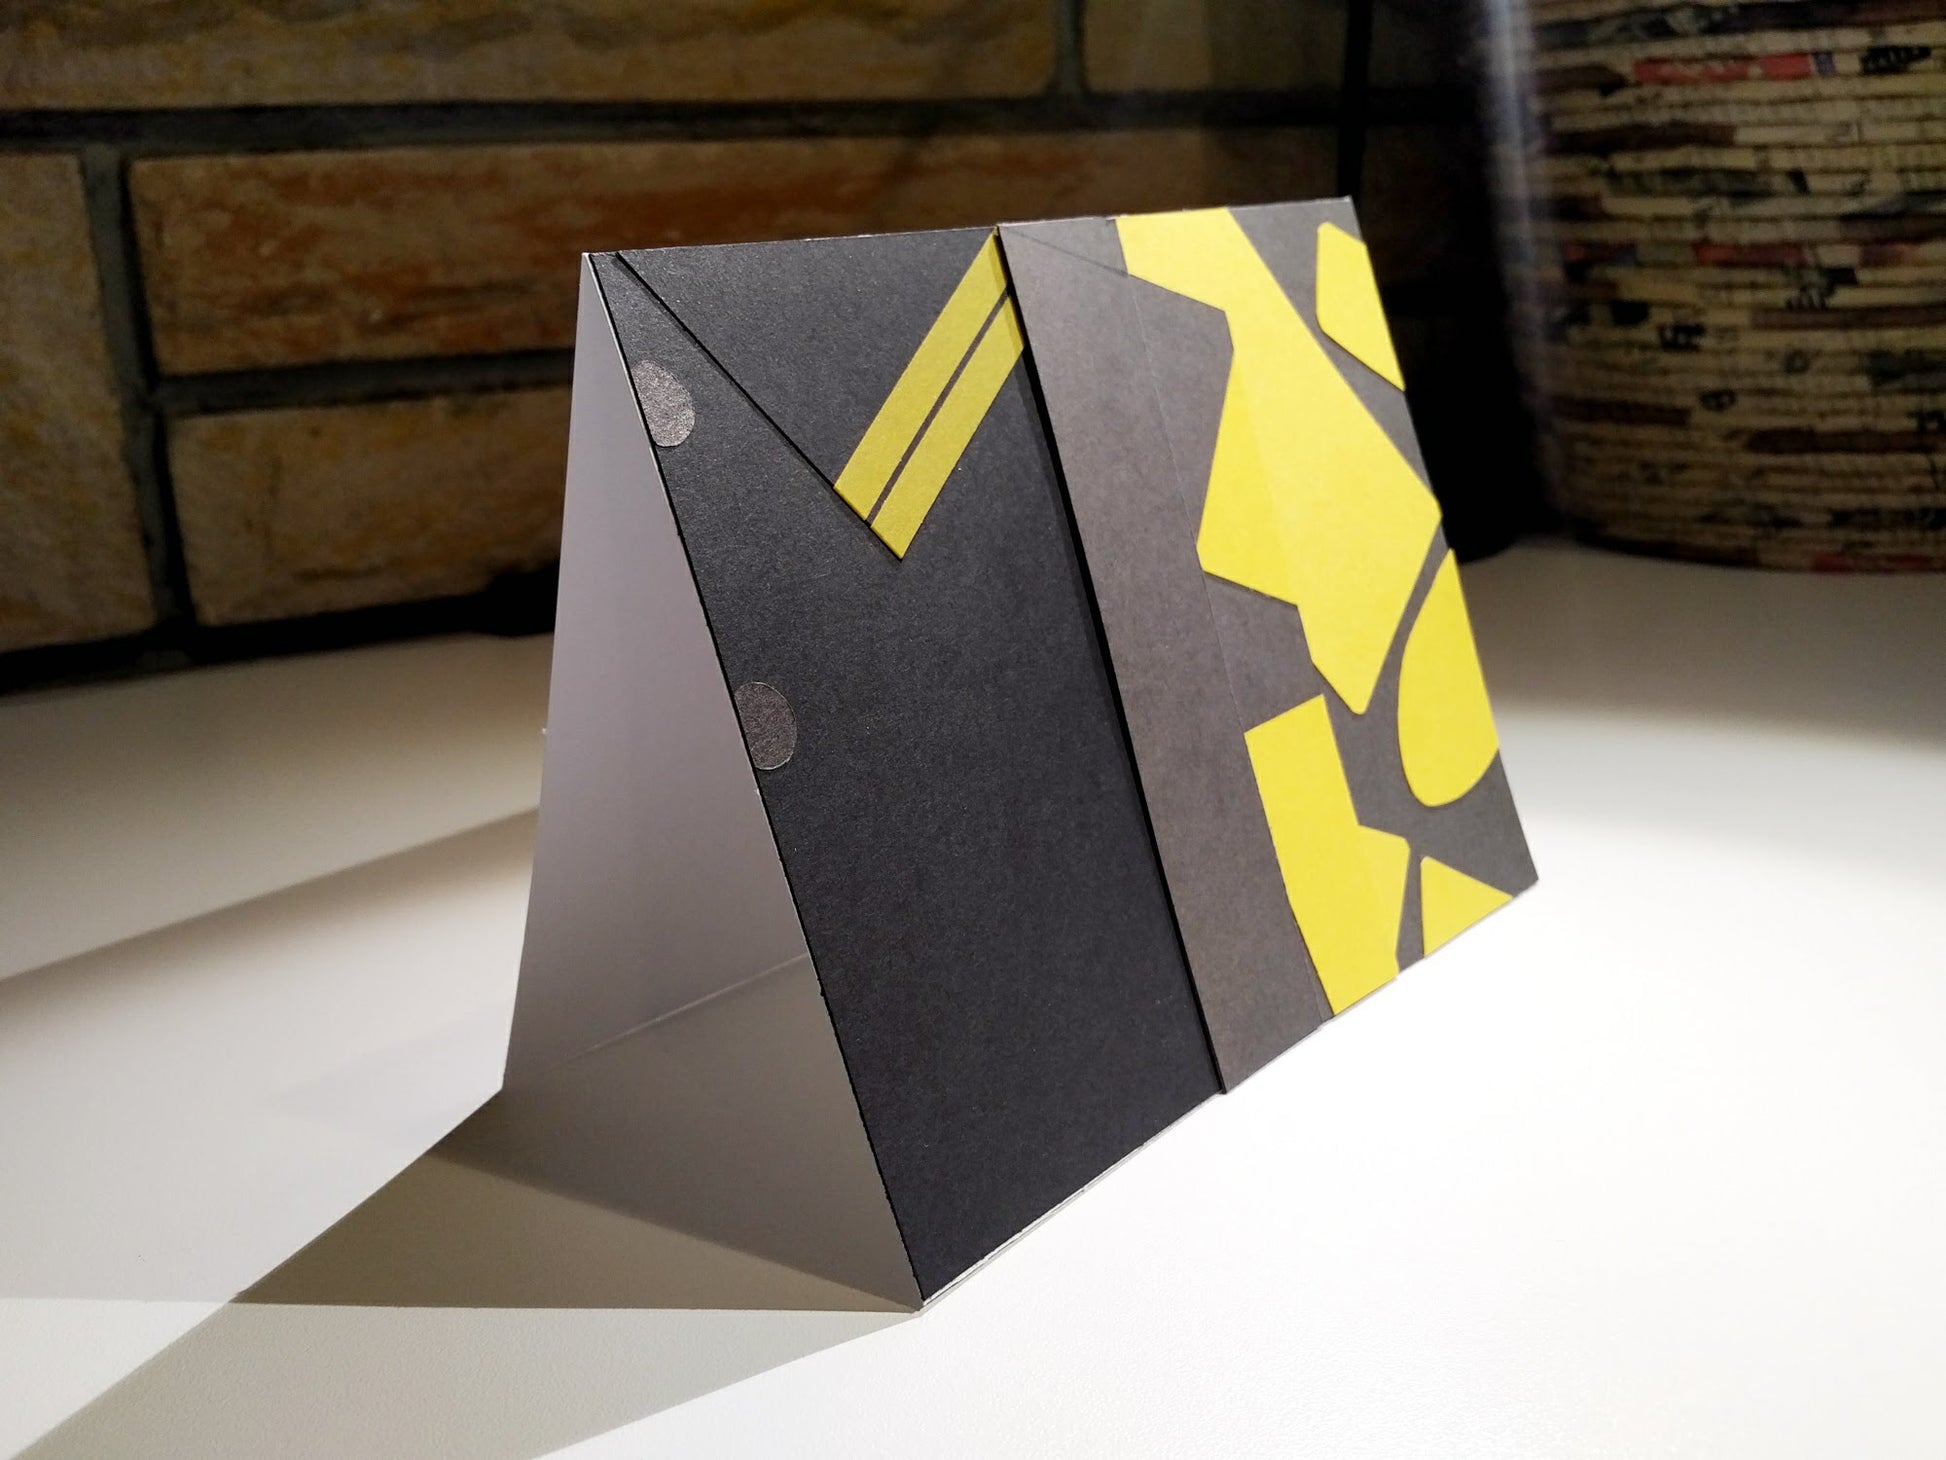 A card stands at an angle on a desk. A brown brick wall is in the background. The front of the card looks like a portion of person's shirt, black with yellow details, designed to look like an outfit worn by Eggsy Unwin in the movie Kingsman: The Secret Service.